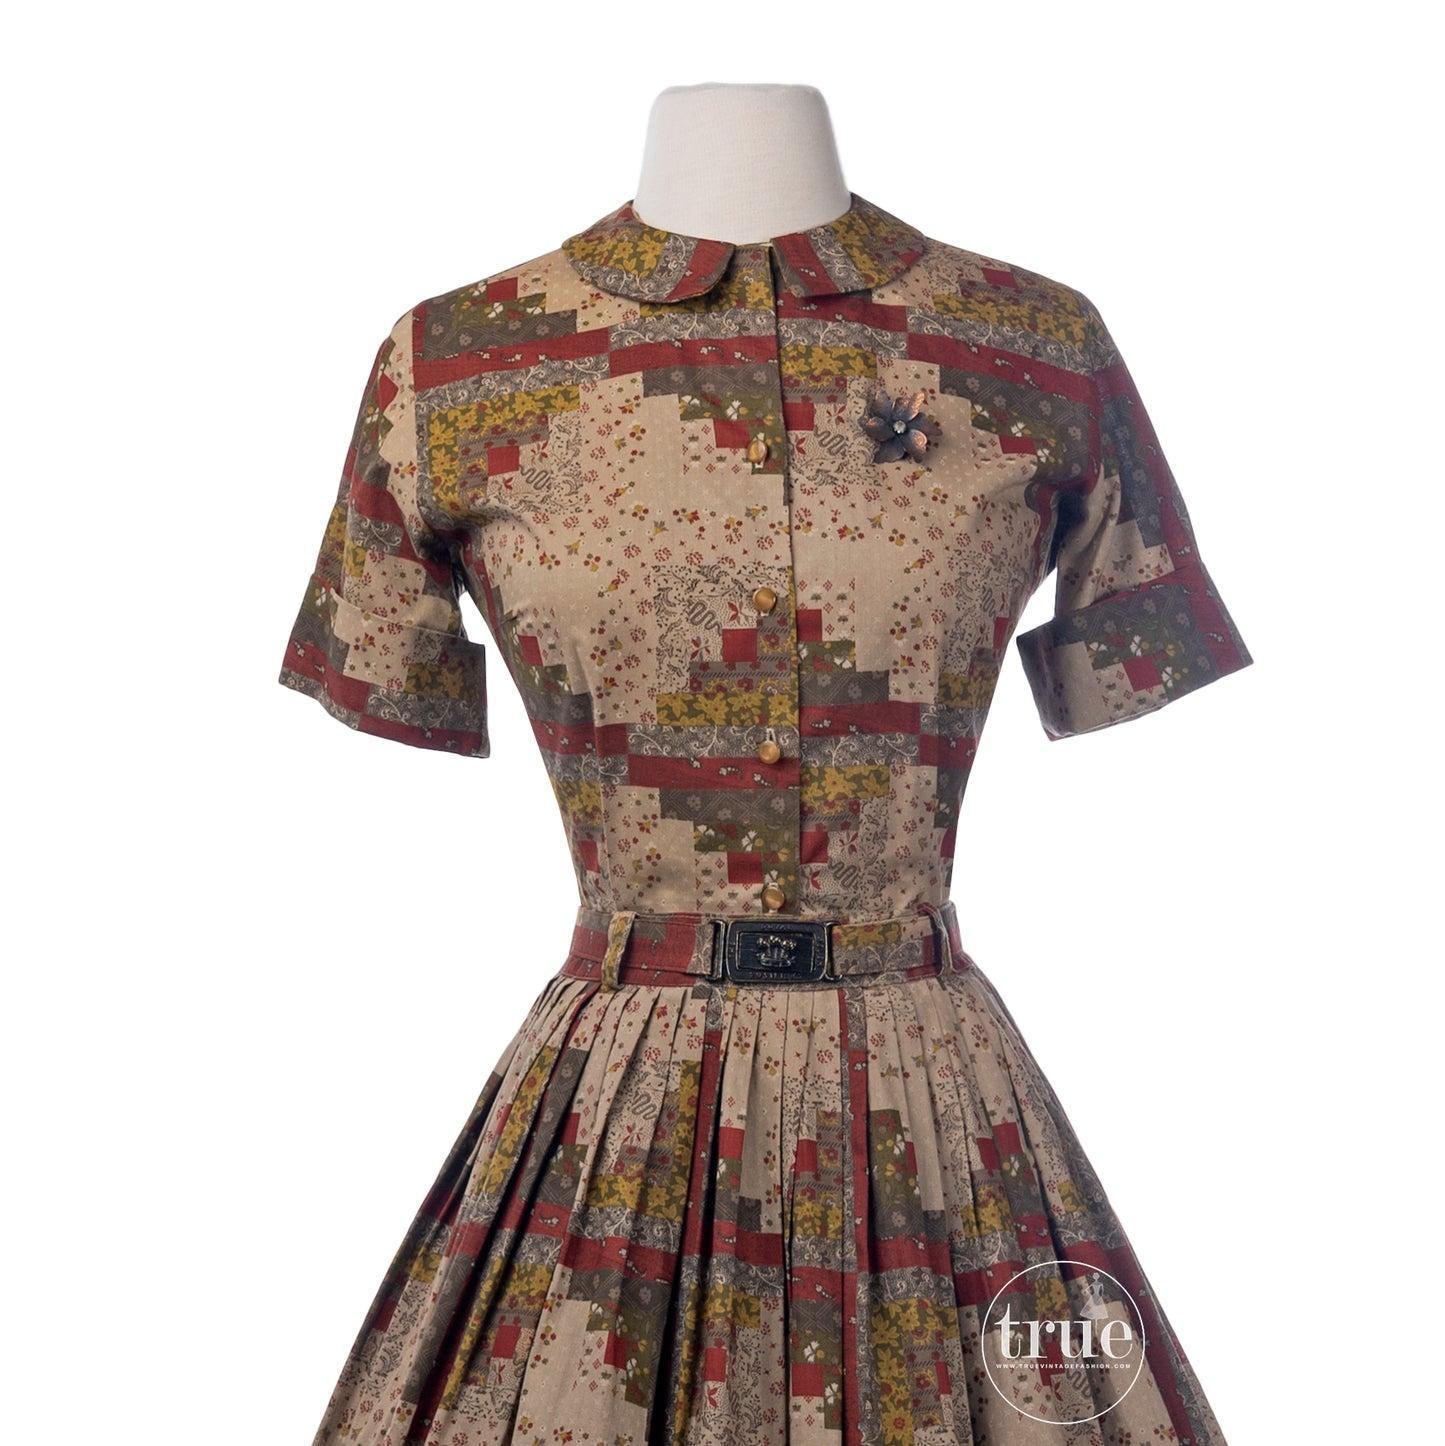 vintage 1950's dress ensemble ...2 piece fall patchwork print top & skirt with the royal welsh fusiliers belt